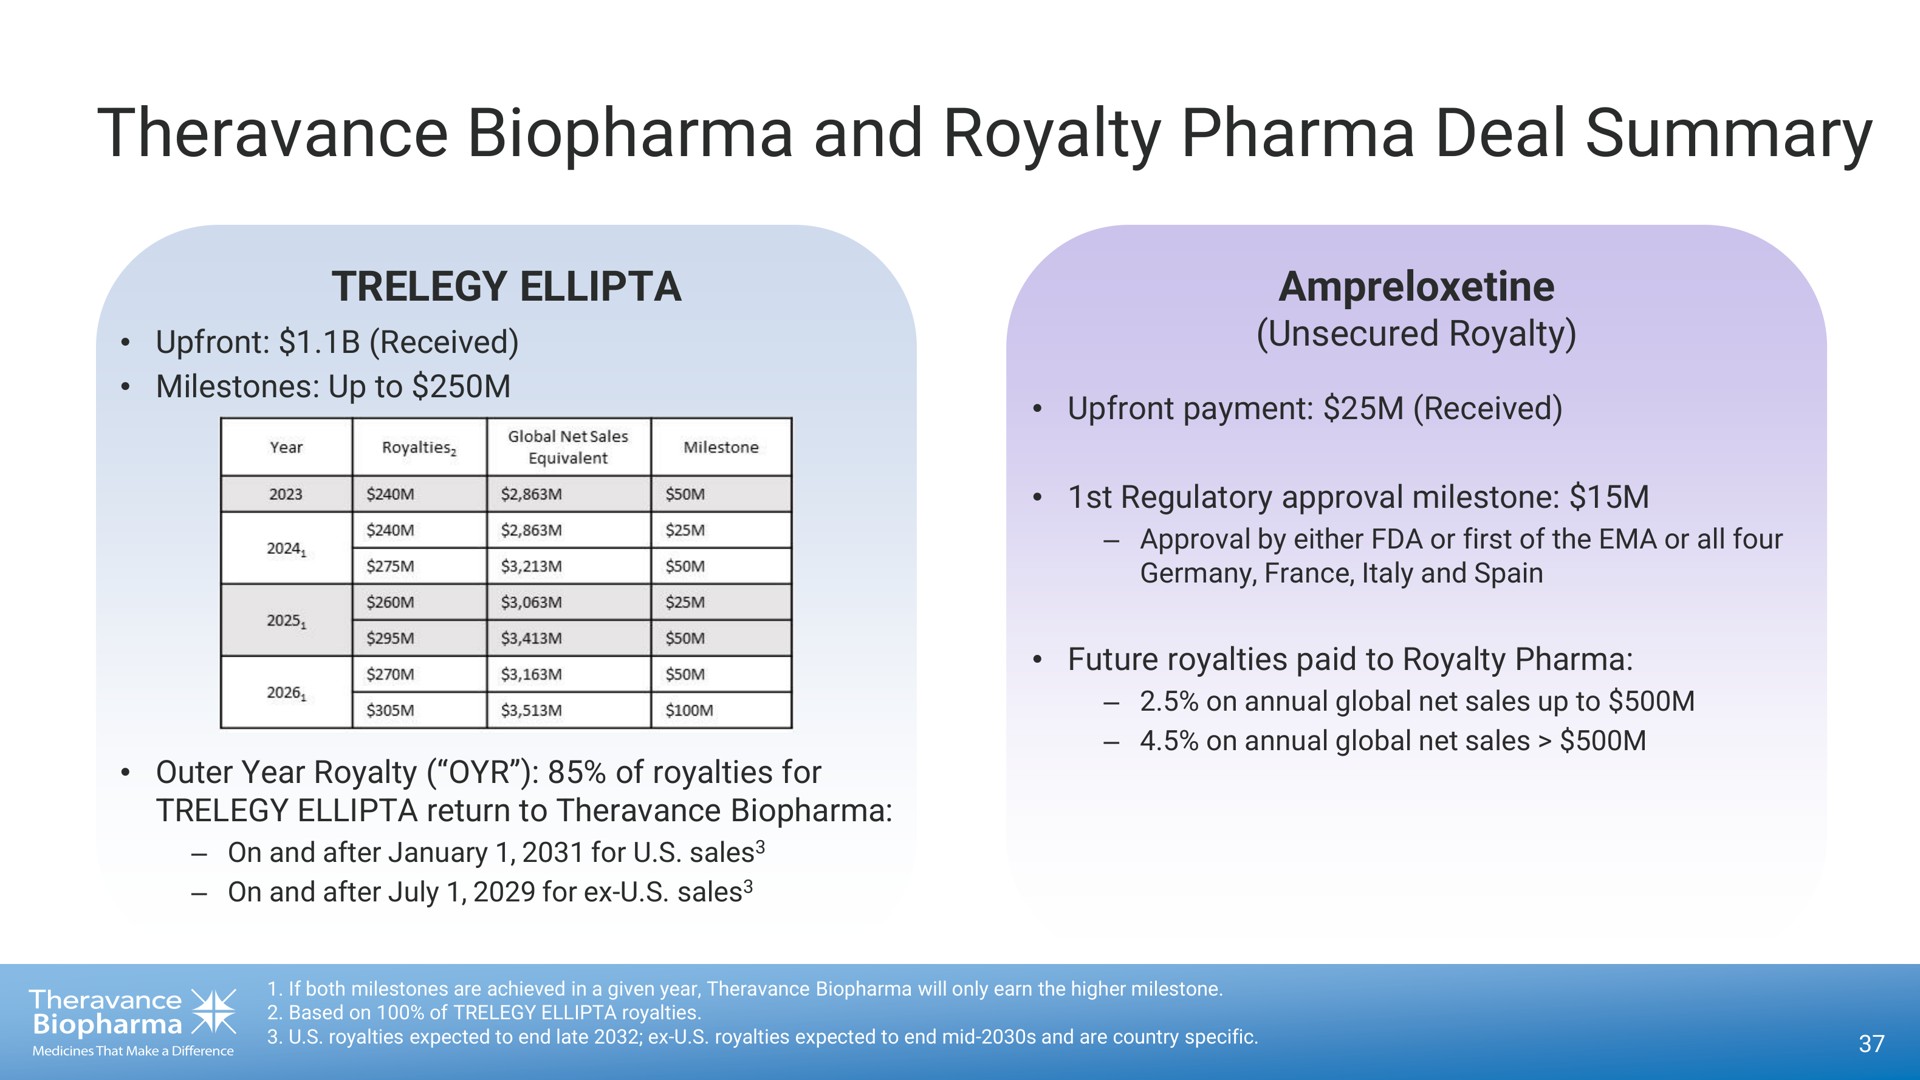 and royalty deal summary sow | Theravance Biopharma